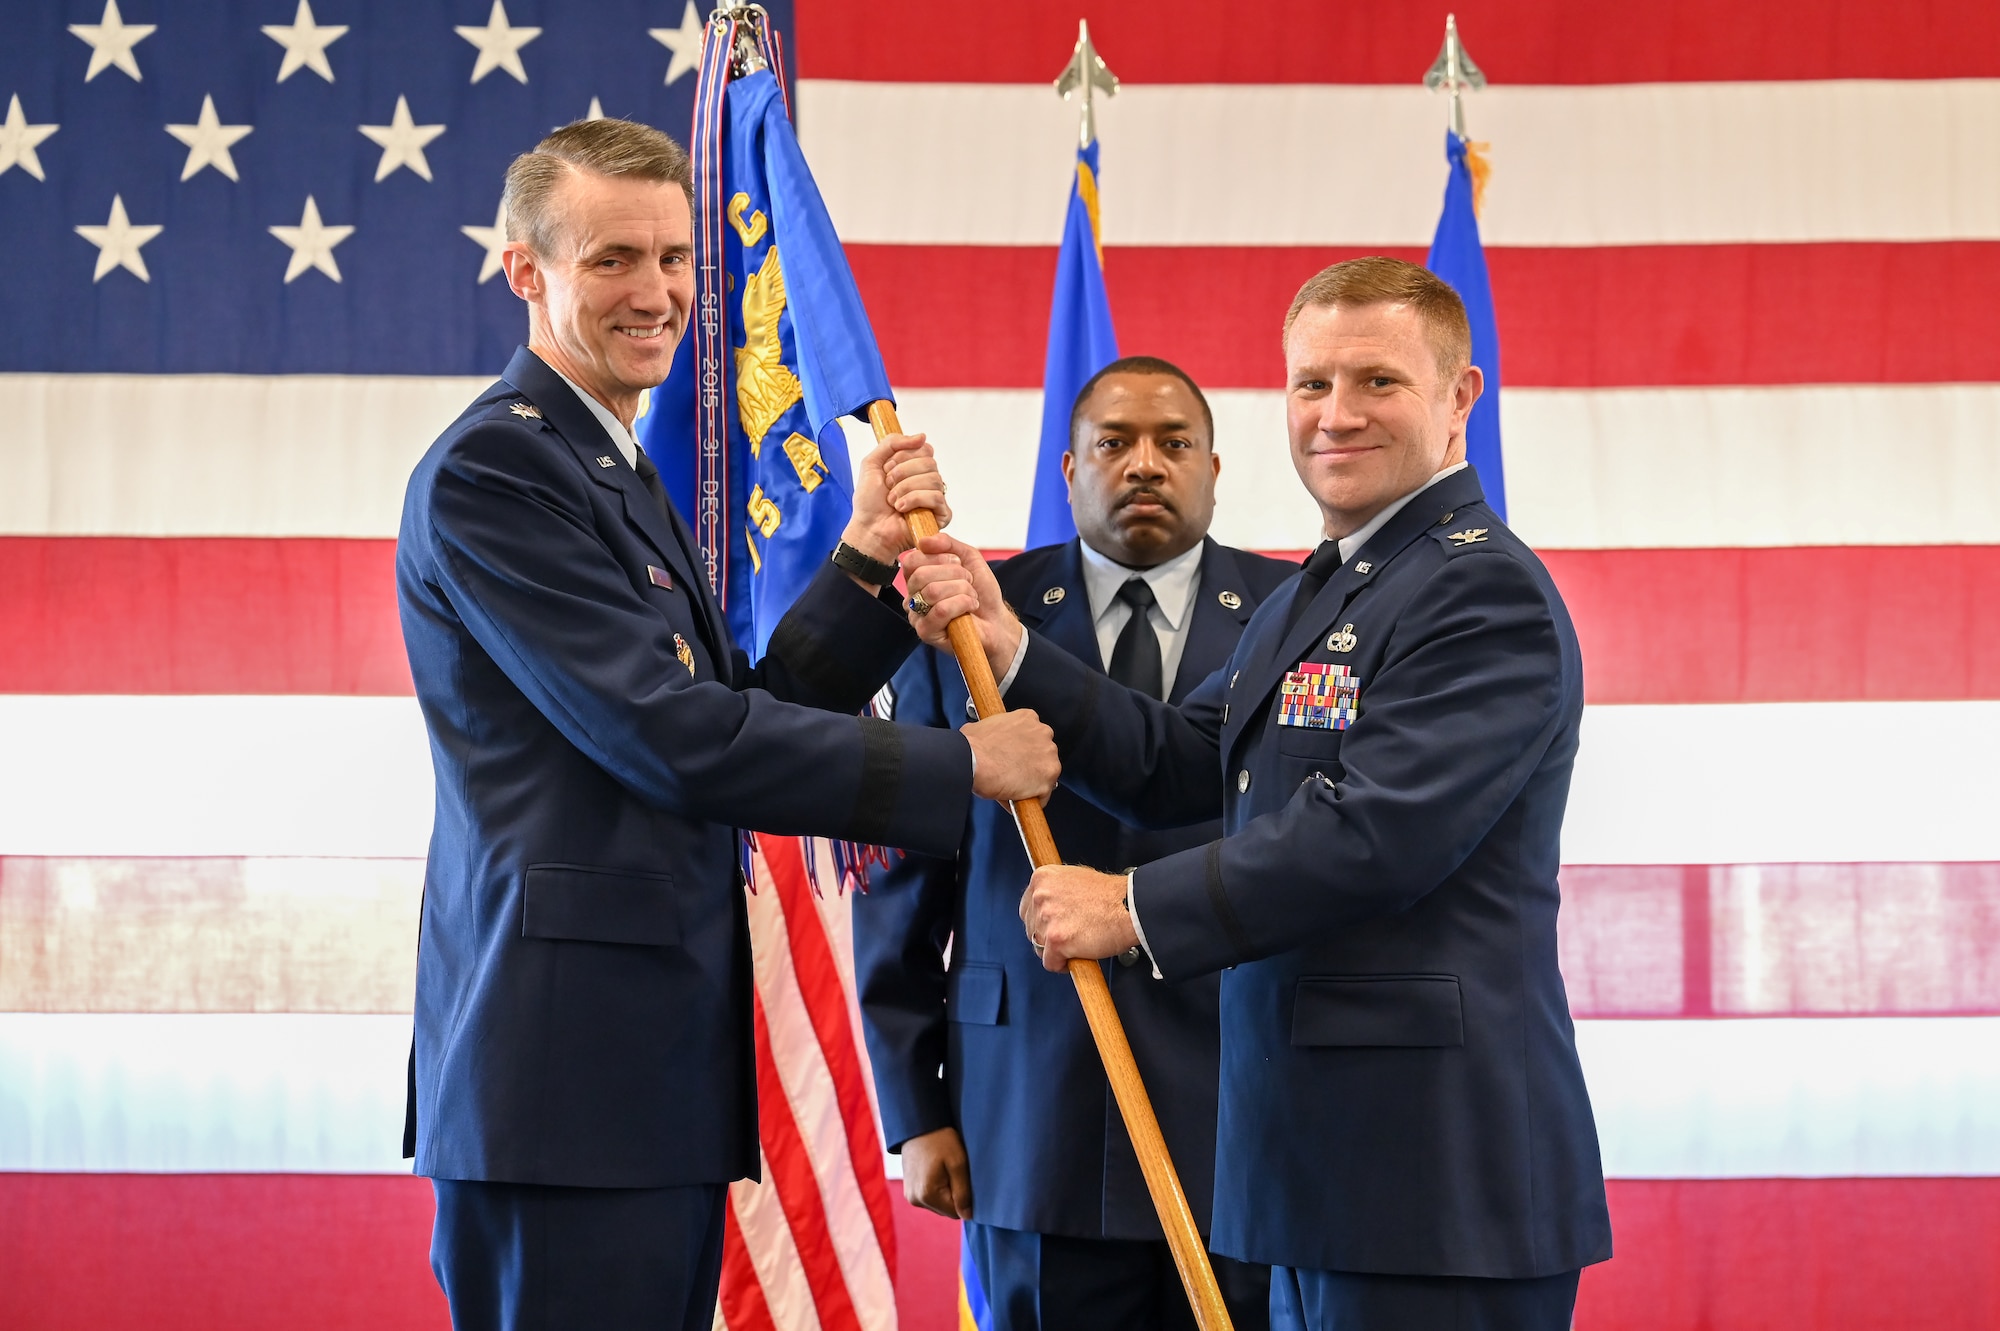 Col. Jeffrey G. Holland, incoming 75th Air Base Wing commander, receives the guidon from Lt. Gen. Tom D. Miller, Air Force Sustainment Center commander, during a change of command ceremony June 22, 2022, at Hill Air Force Base,